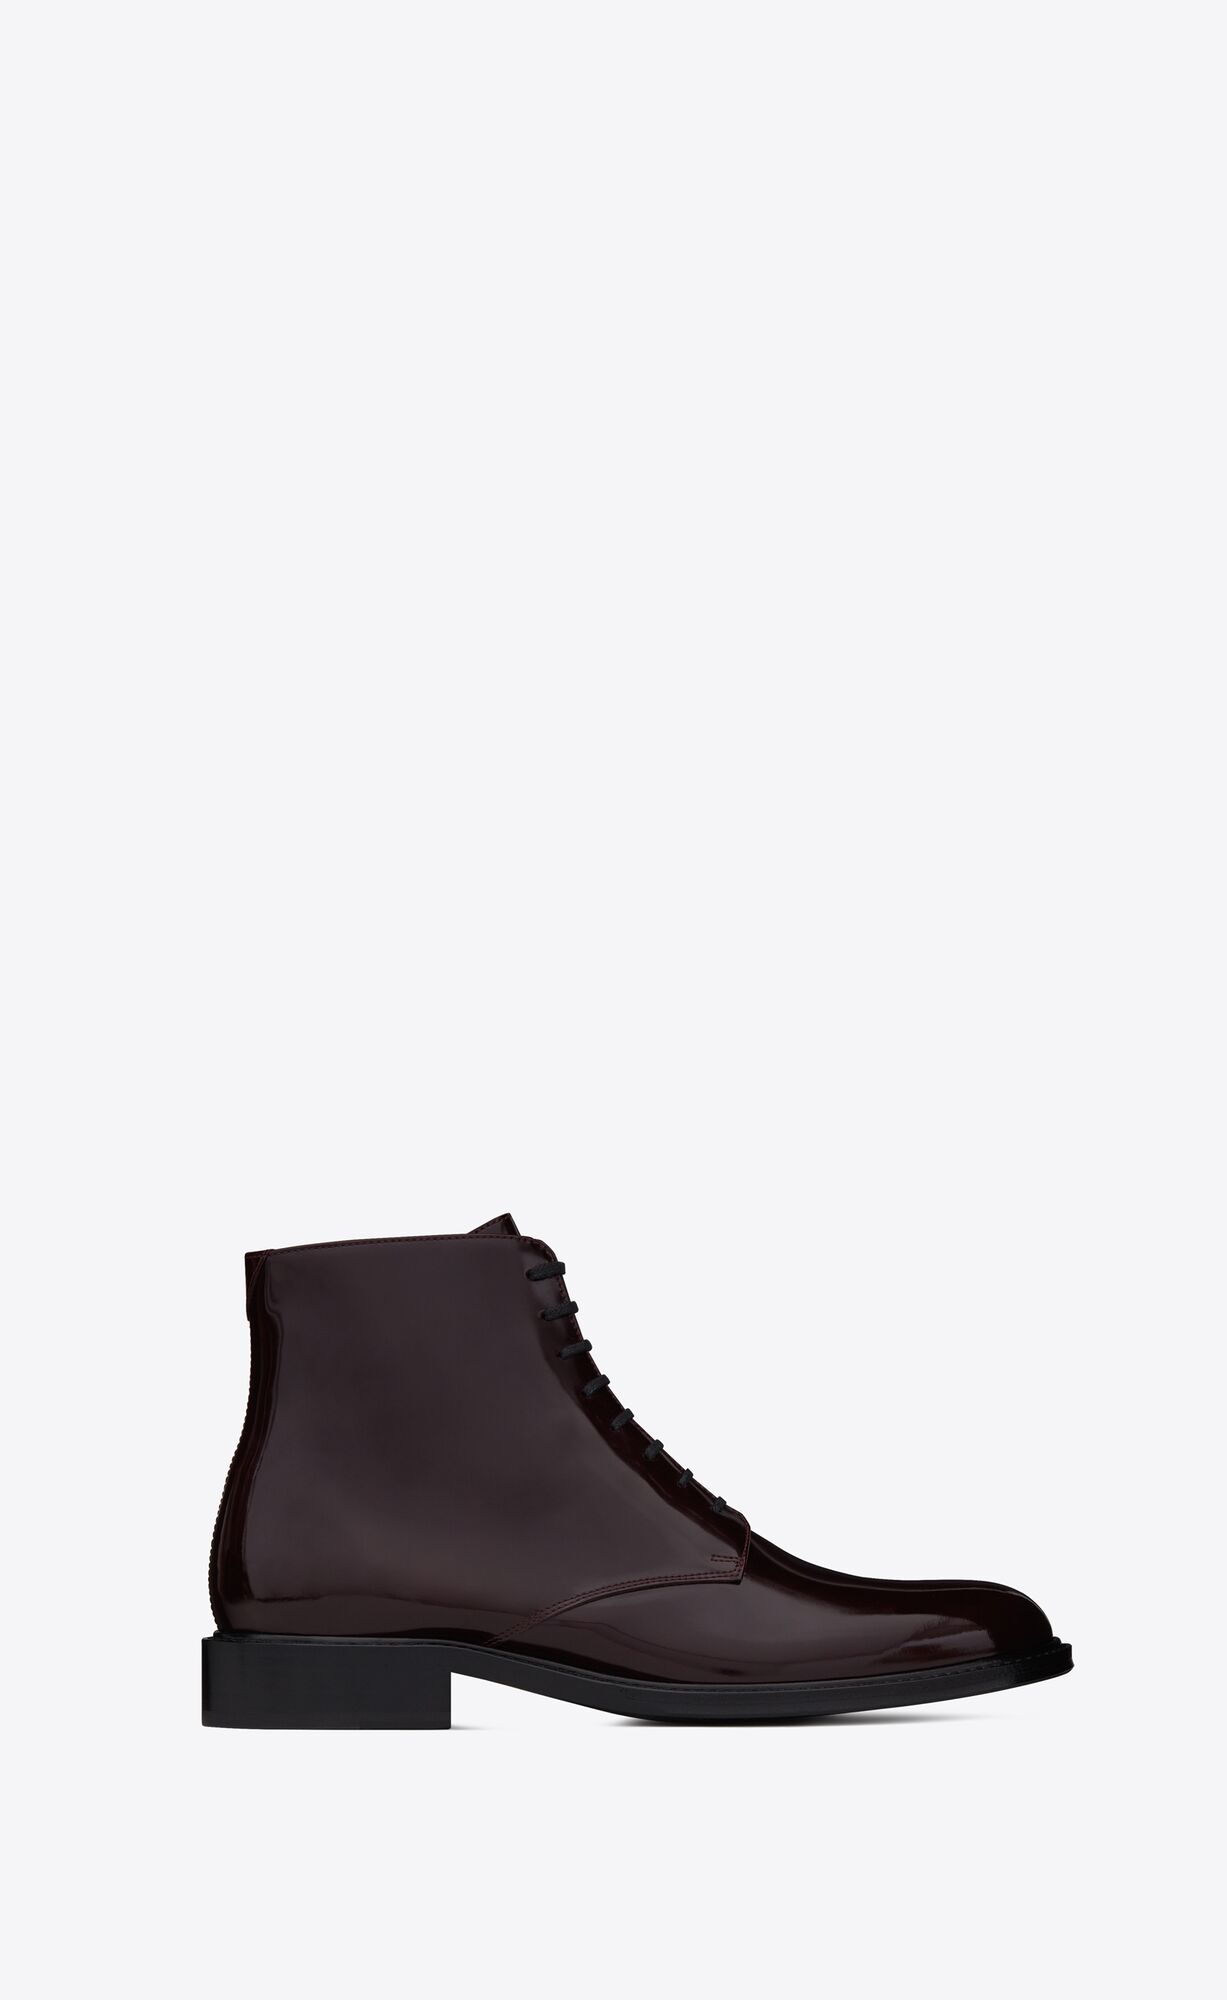 ARMY LACED BOOTS IN SHINY LEATHER | Saint Laurent Zimbabwe | YSL.com